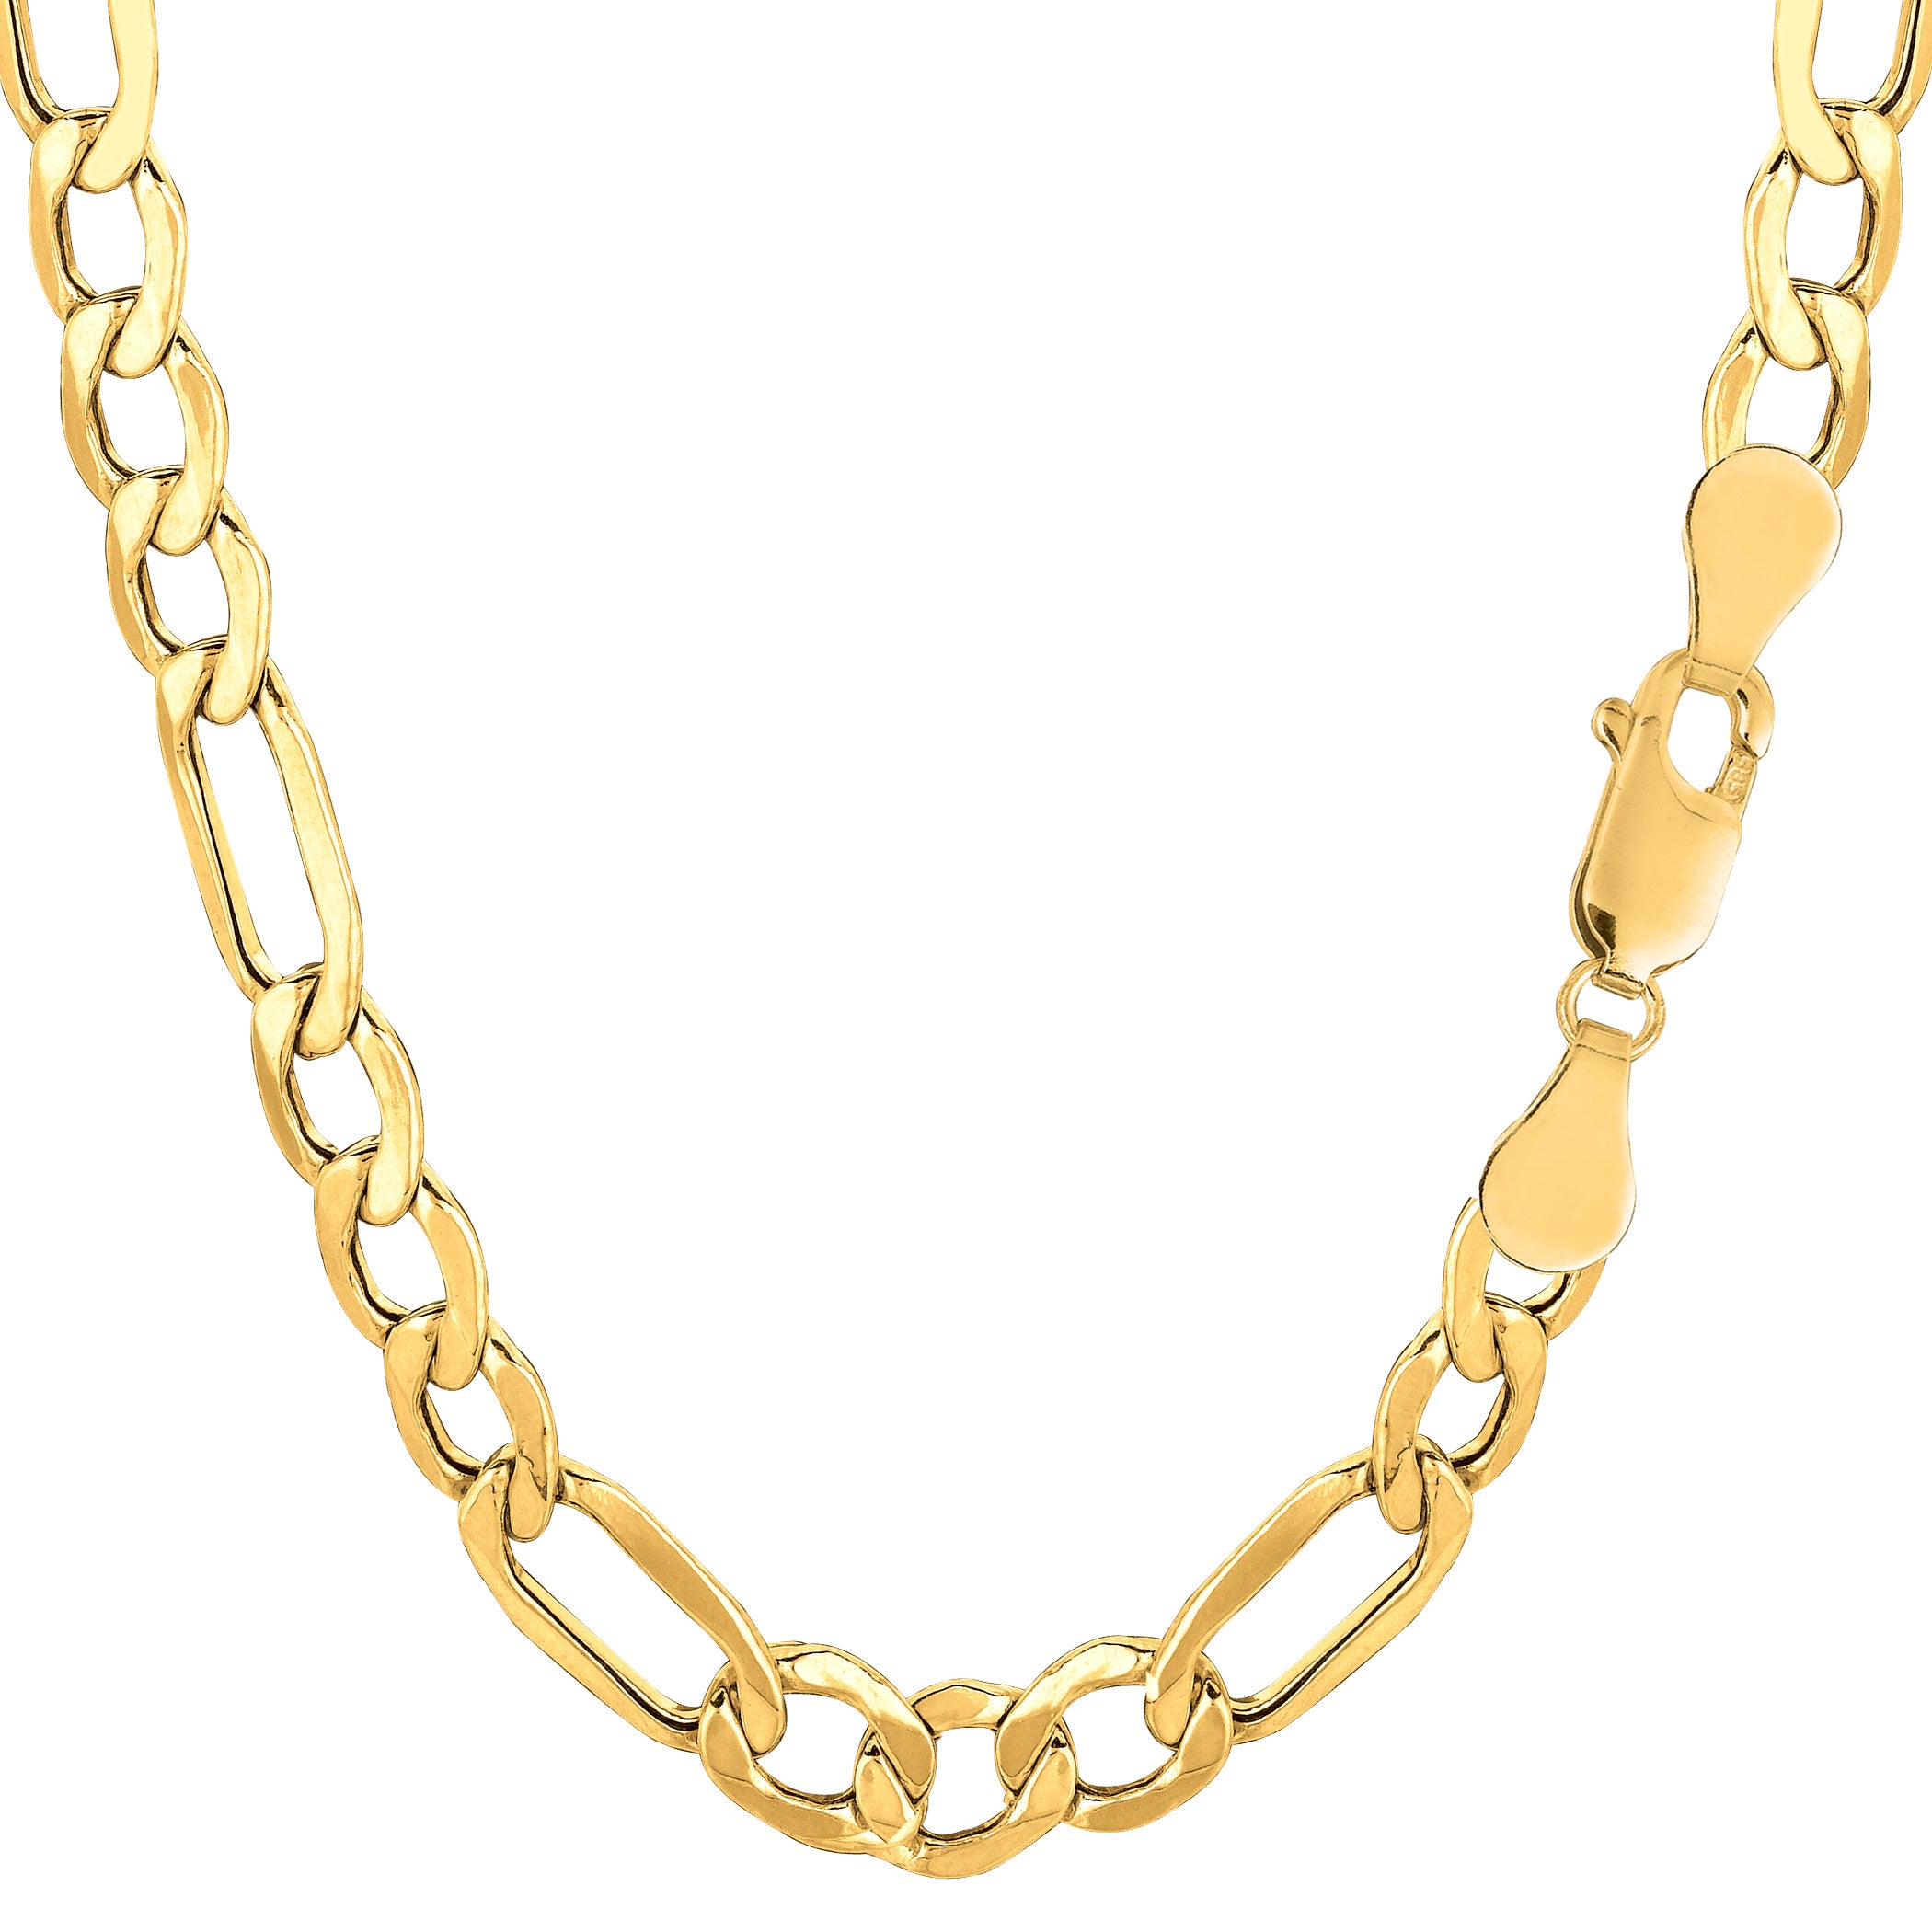 14K Yellow Gold Filled Solid Figaro Chain Necklace, 7.0 mm Wide